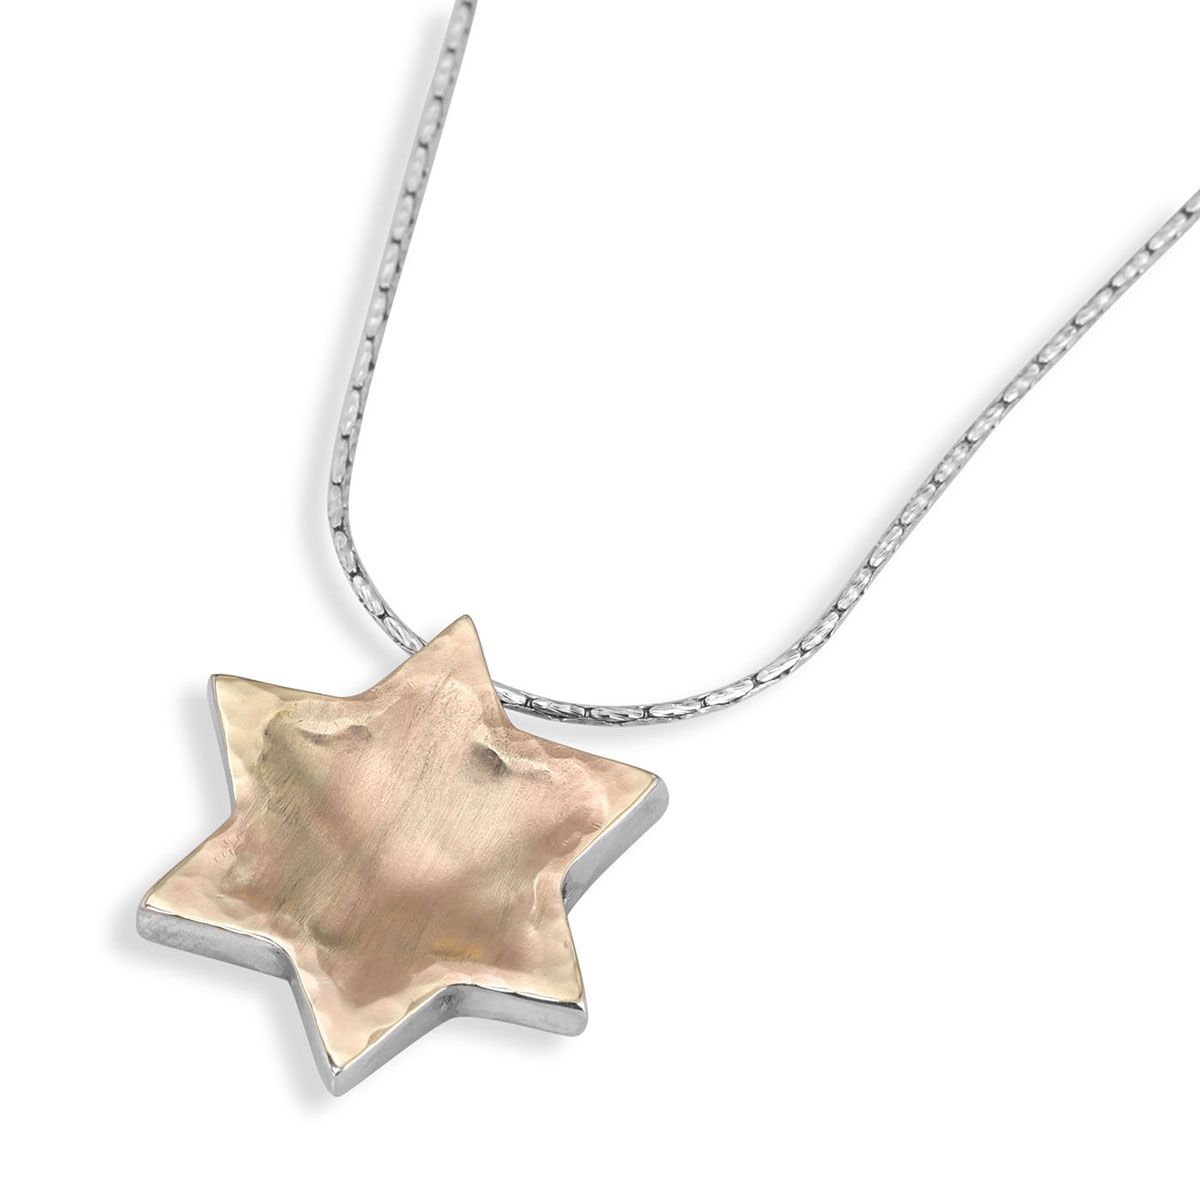 Moriah Jewelry Minimalist Matte Star of David Gold and Sterling Silver Necklace  - 1